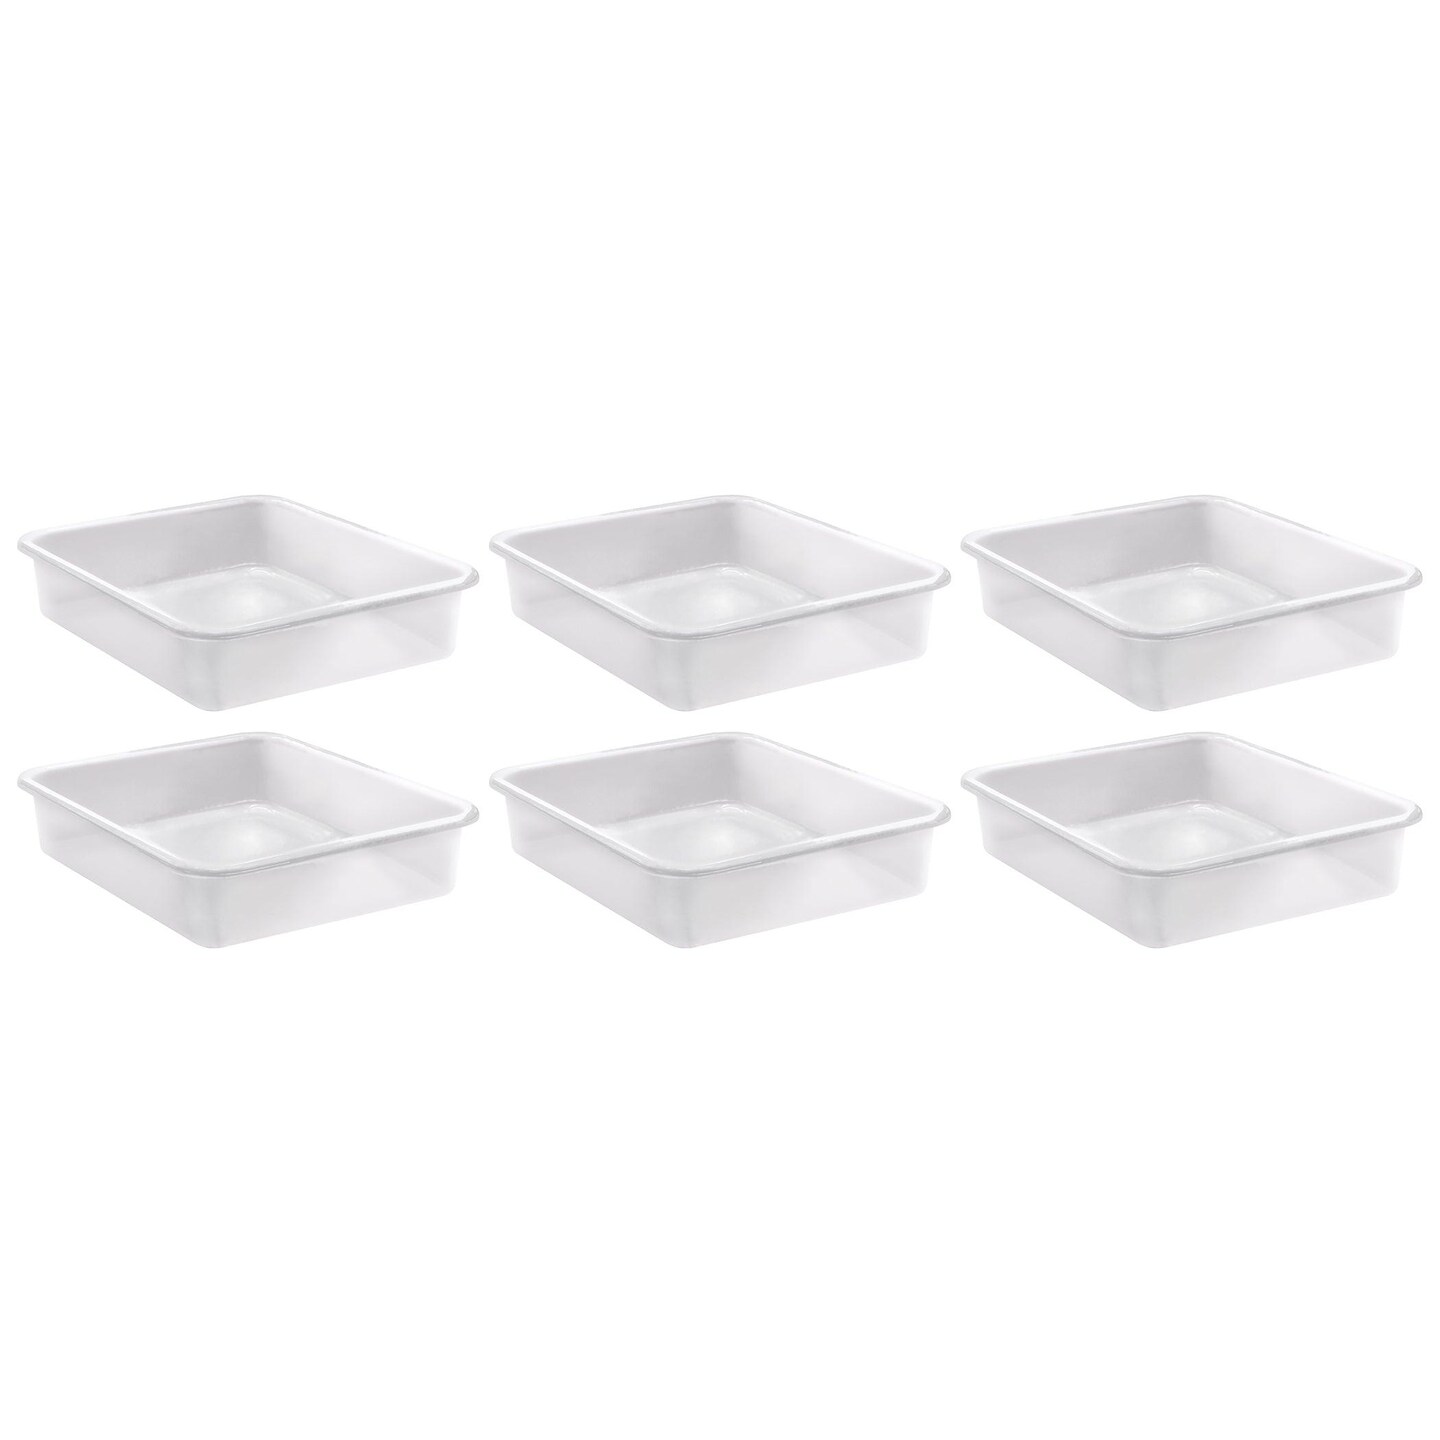 Large Plastic Letter Tray, Clear, Pack of 6